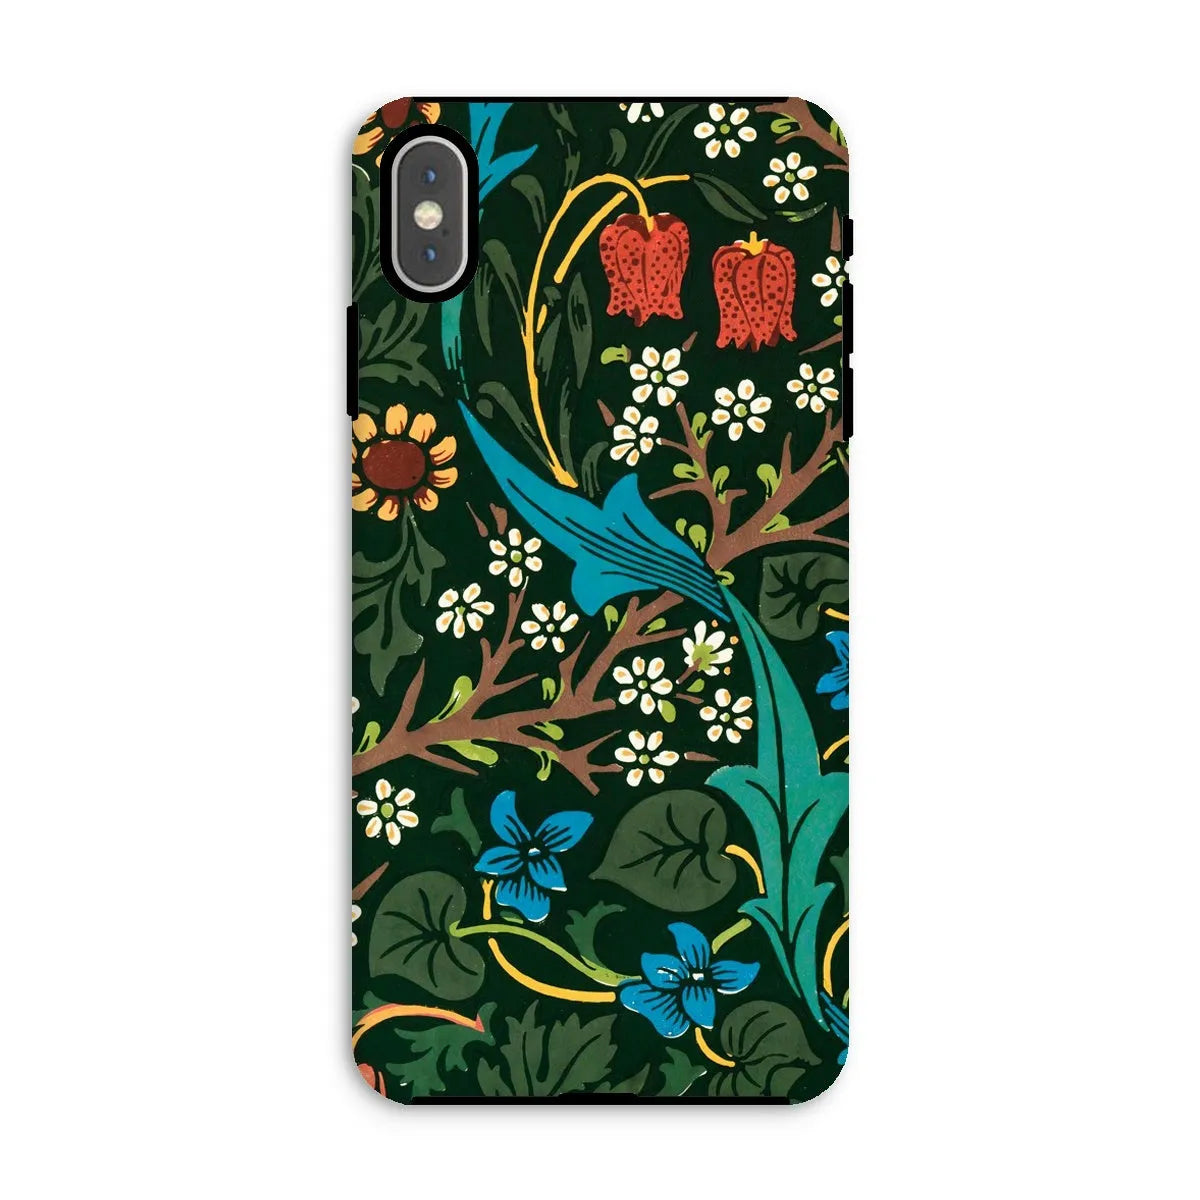 Blackthorn Hawthorn - Floral Phone Case - William Morris - Iphone Xs Max / Matte - Mobile Phone Cases - Aesthetic Art